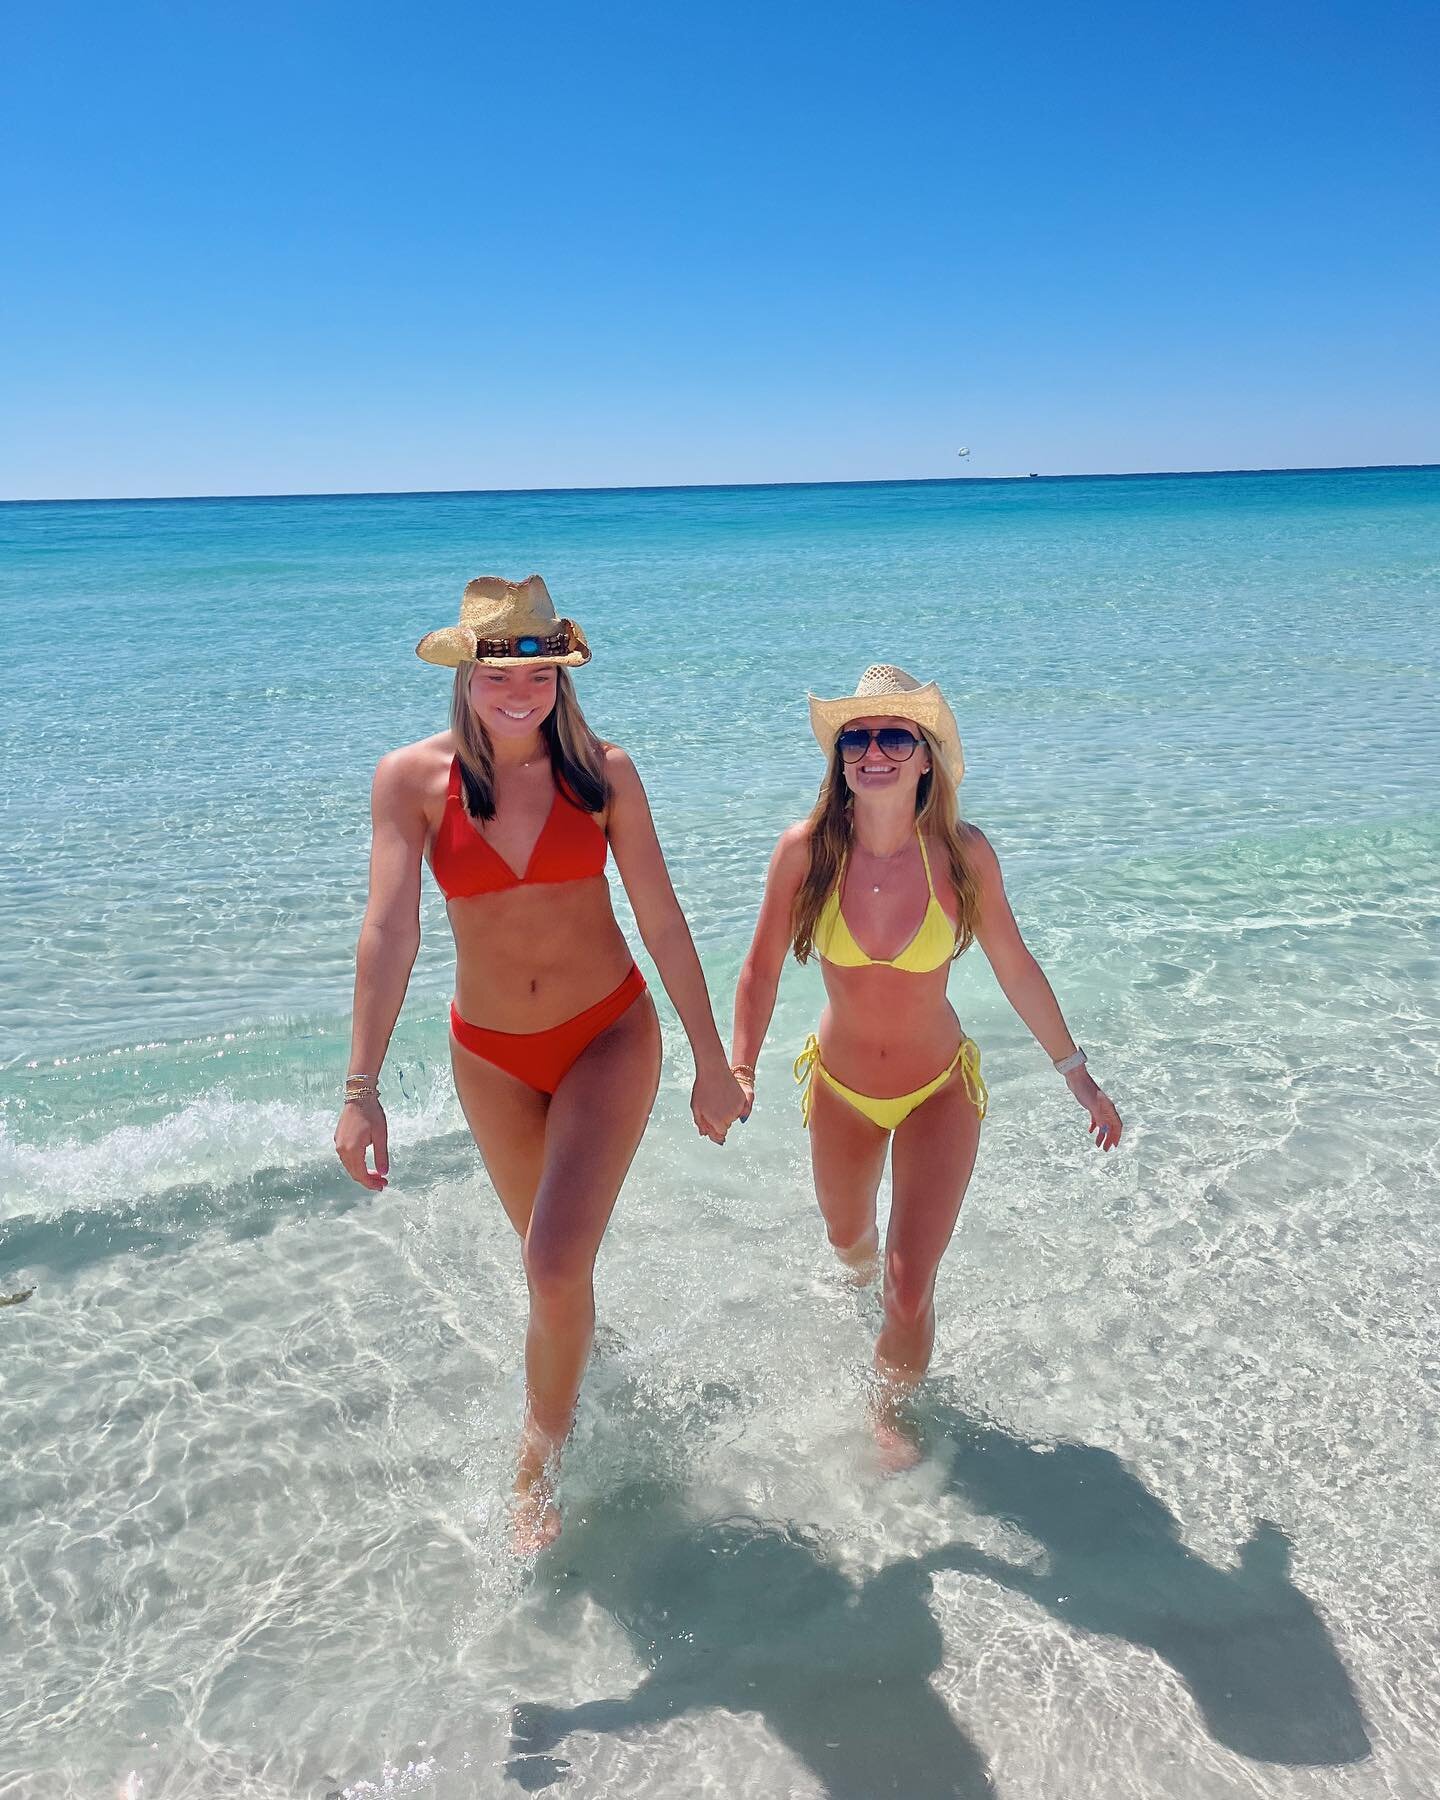 Spring Break countdown is ONNNNN!!!! ☀️☀️☀️☀️

&mdash;tag a sis that you&rsquo;re excited to travel with over this Spring Break! 

#XO #PhiDeltaLovesYou #ChiOmega